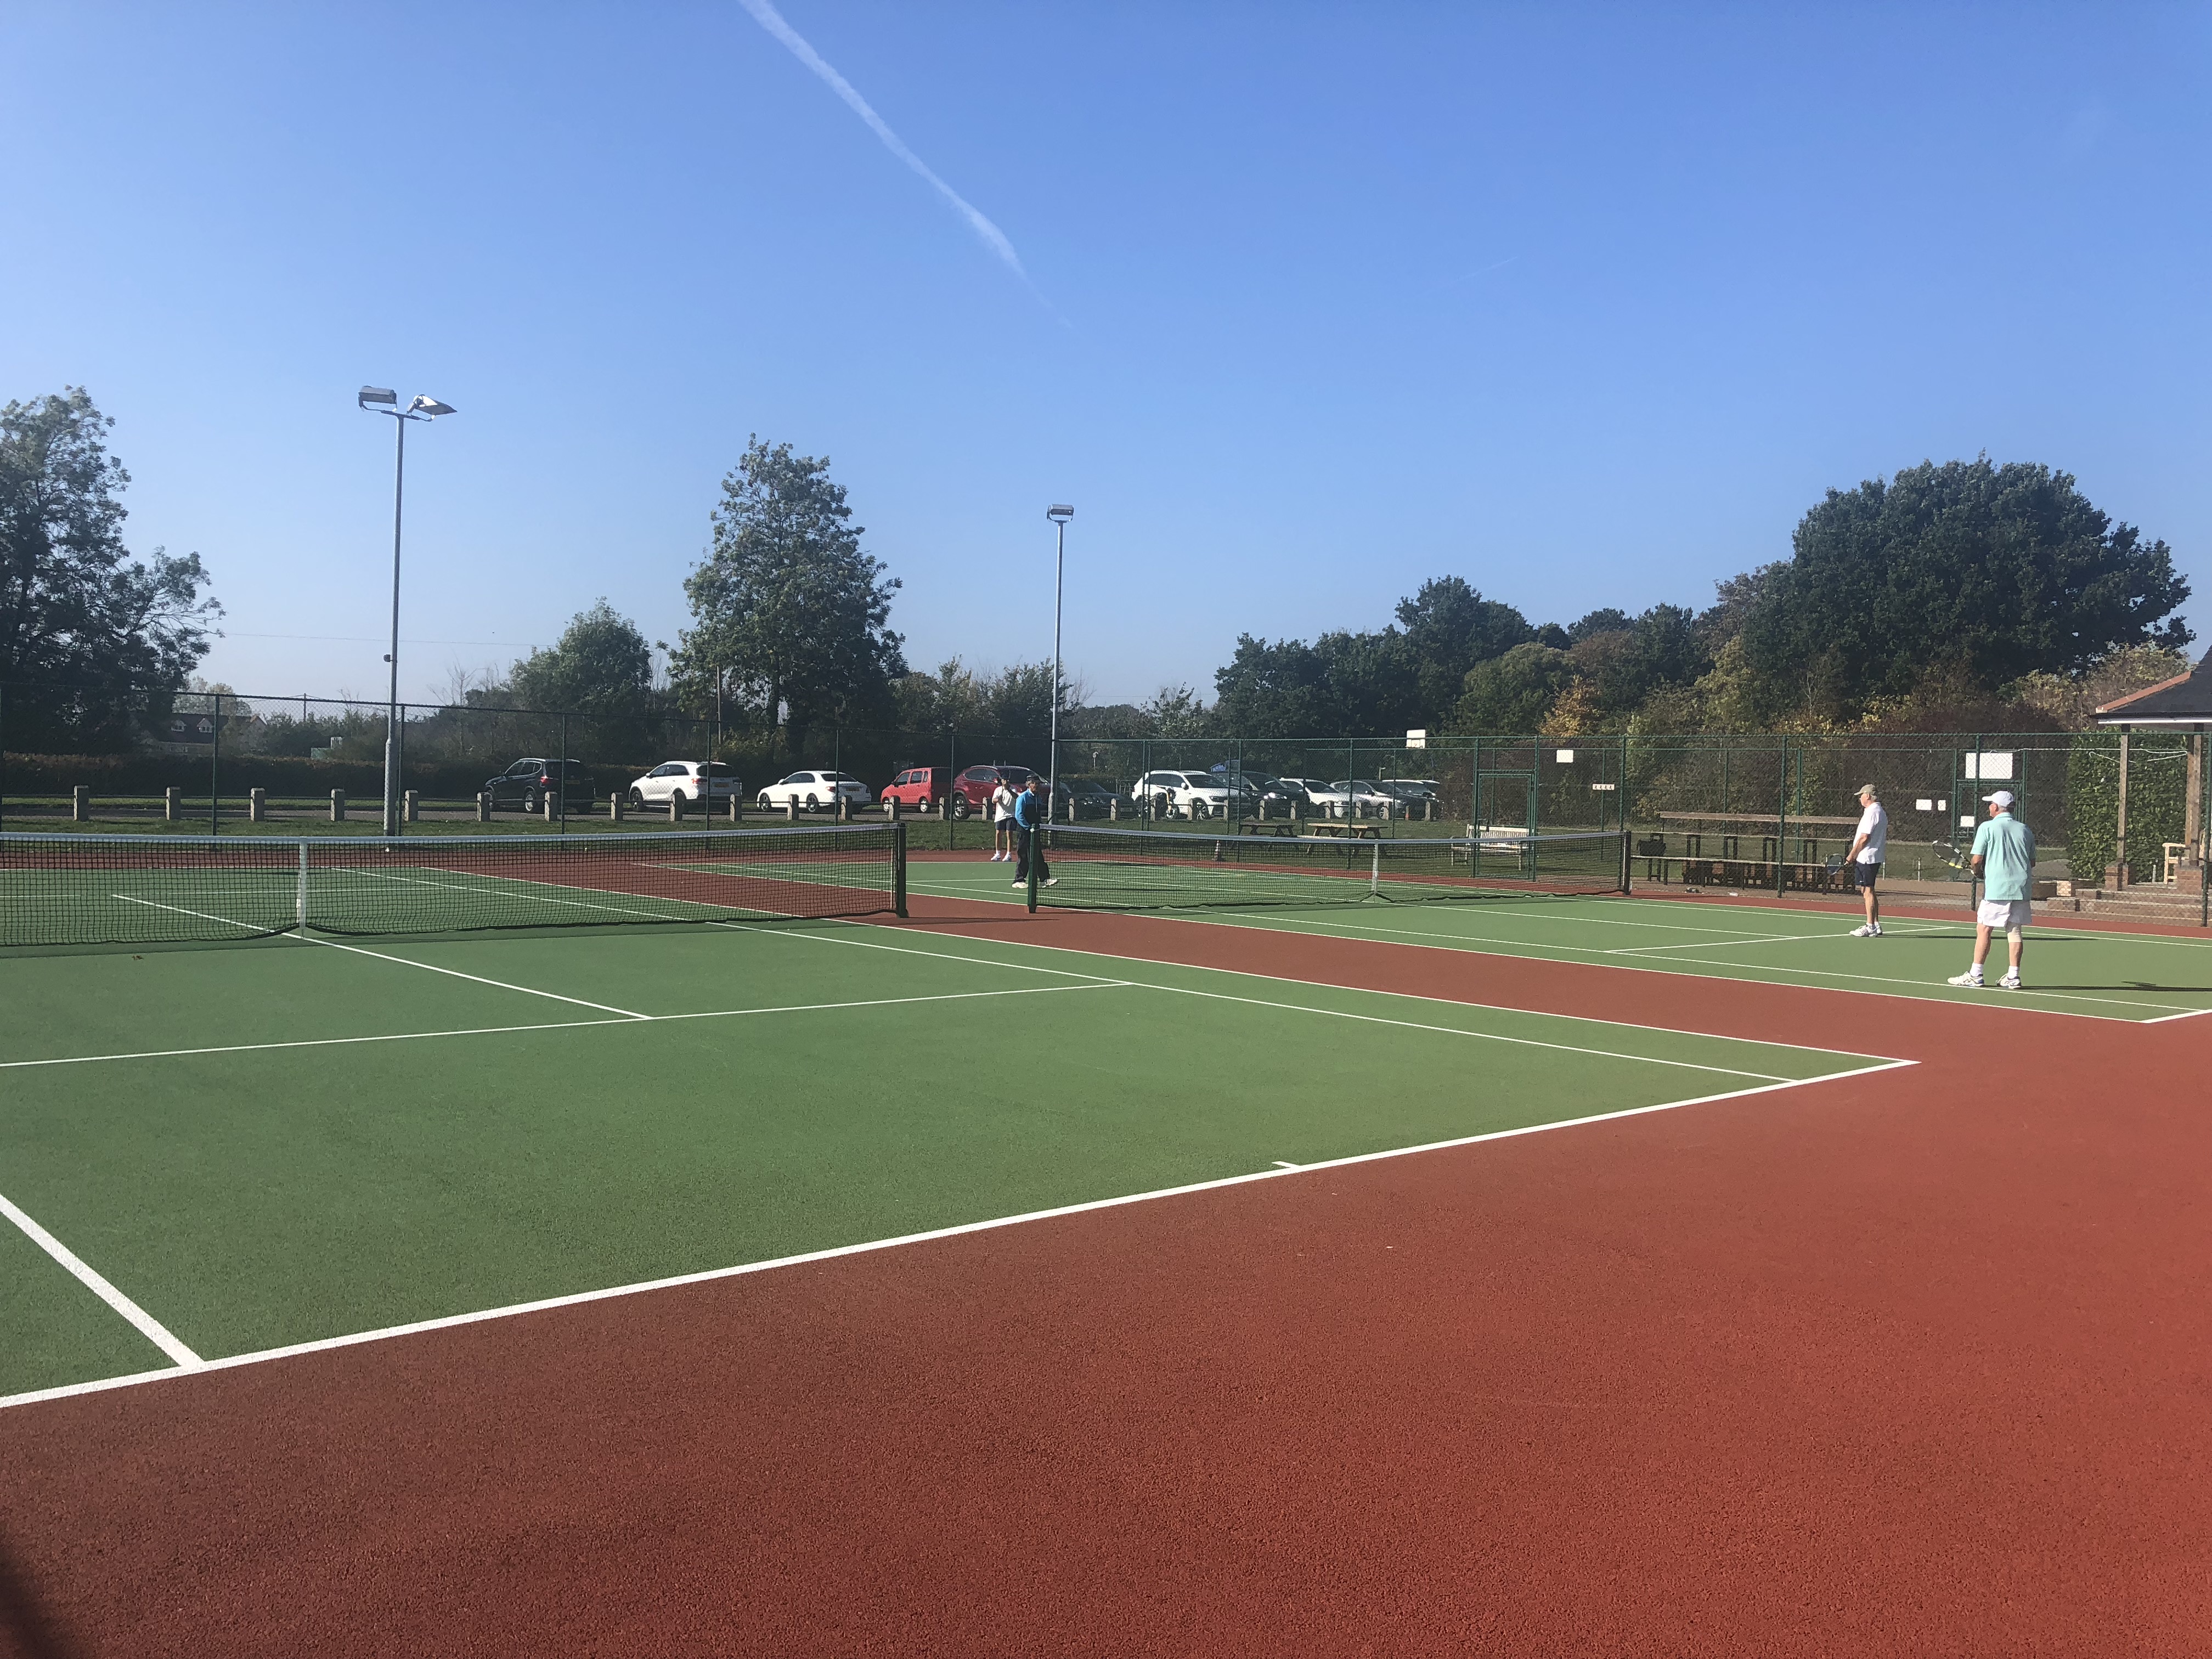 A tennis court construction with porous asphalt for an Essex based club